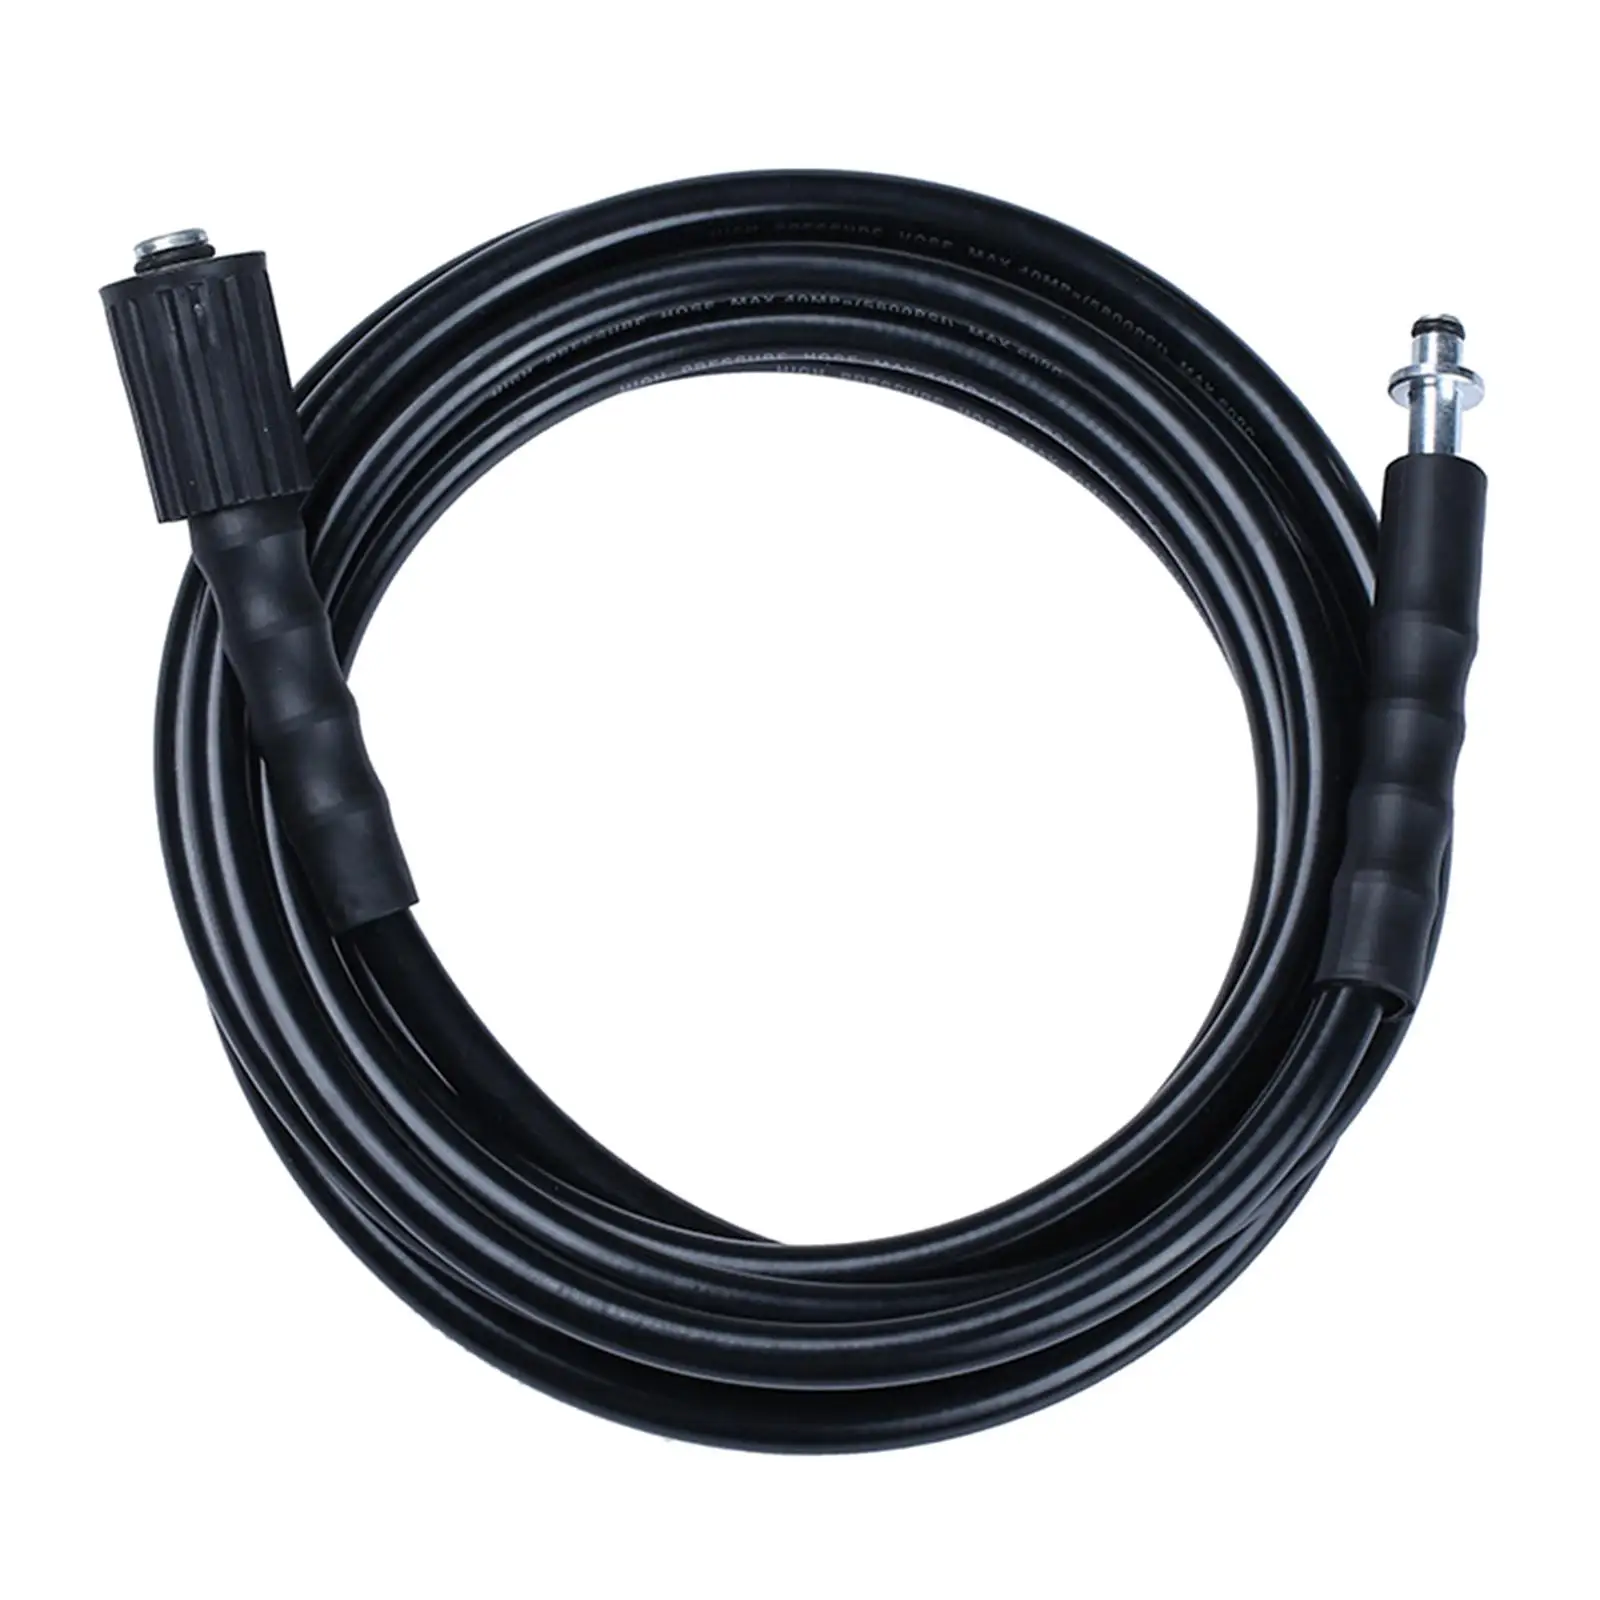 Pressure Washer Hose 5M Cleaner Rubber Replacement Washer Hose for Garden Patio Household